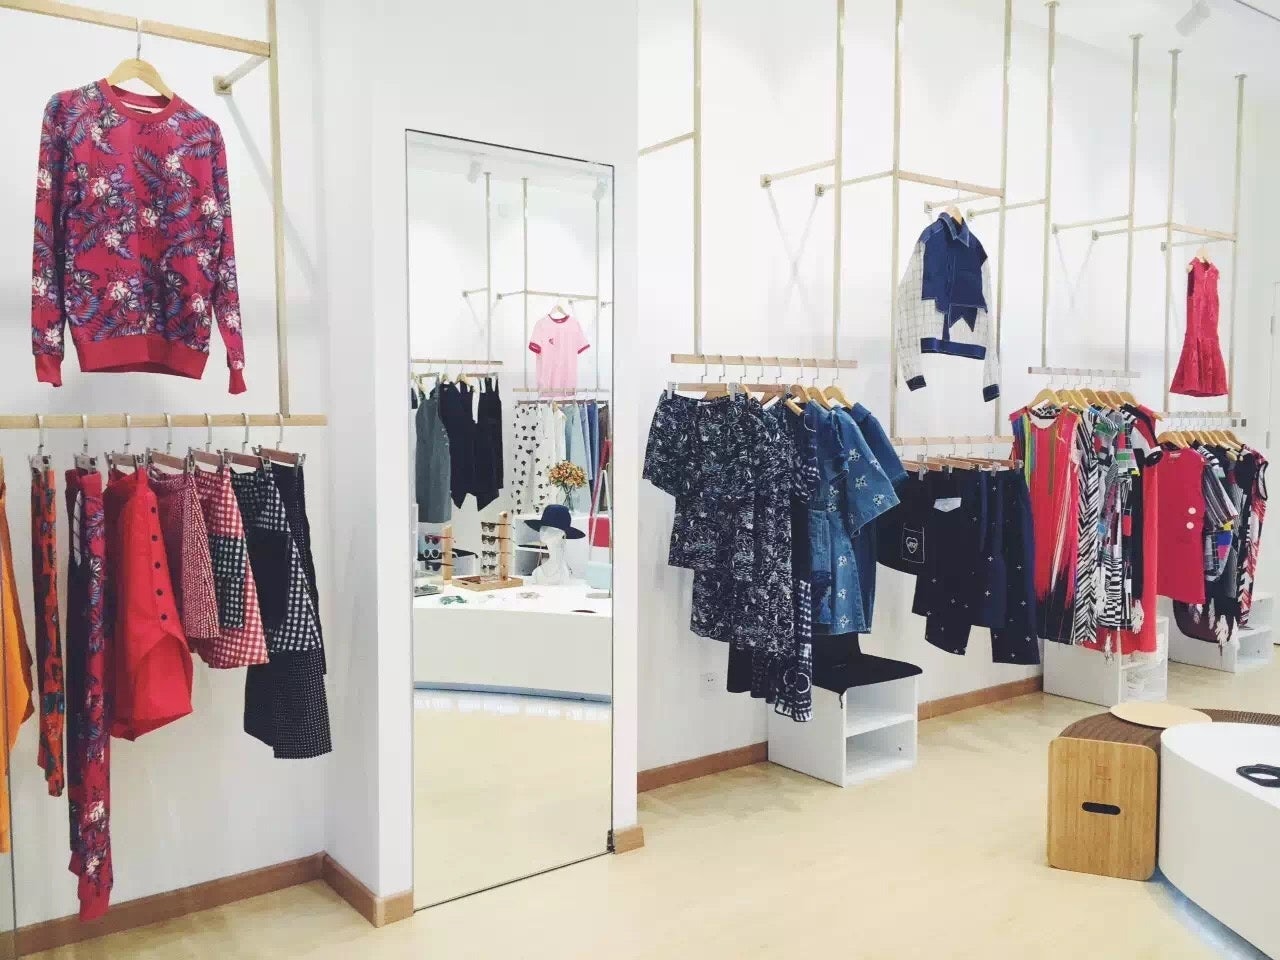 Inside Sseeroom, a multi-brand boutique that features international designers like House of Holland alongside Chinese rising stars. (Courtesy Photo)